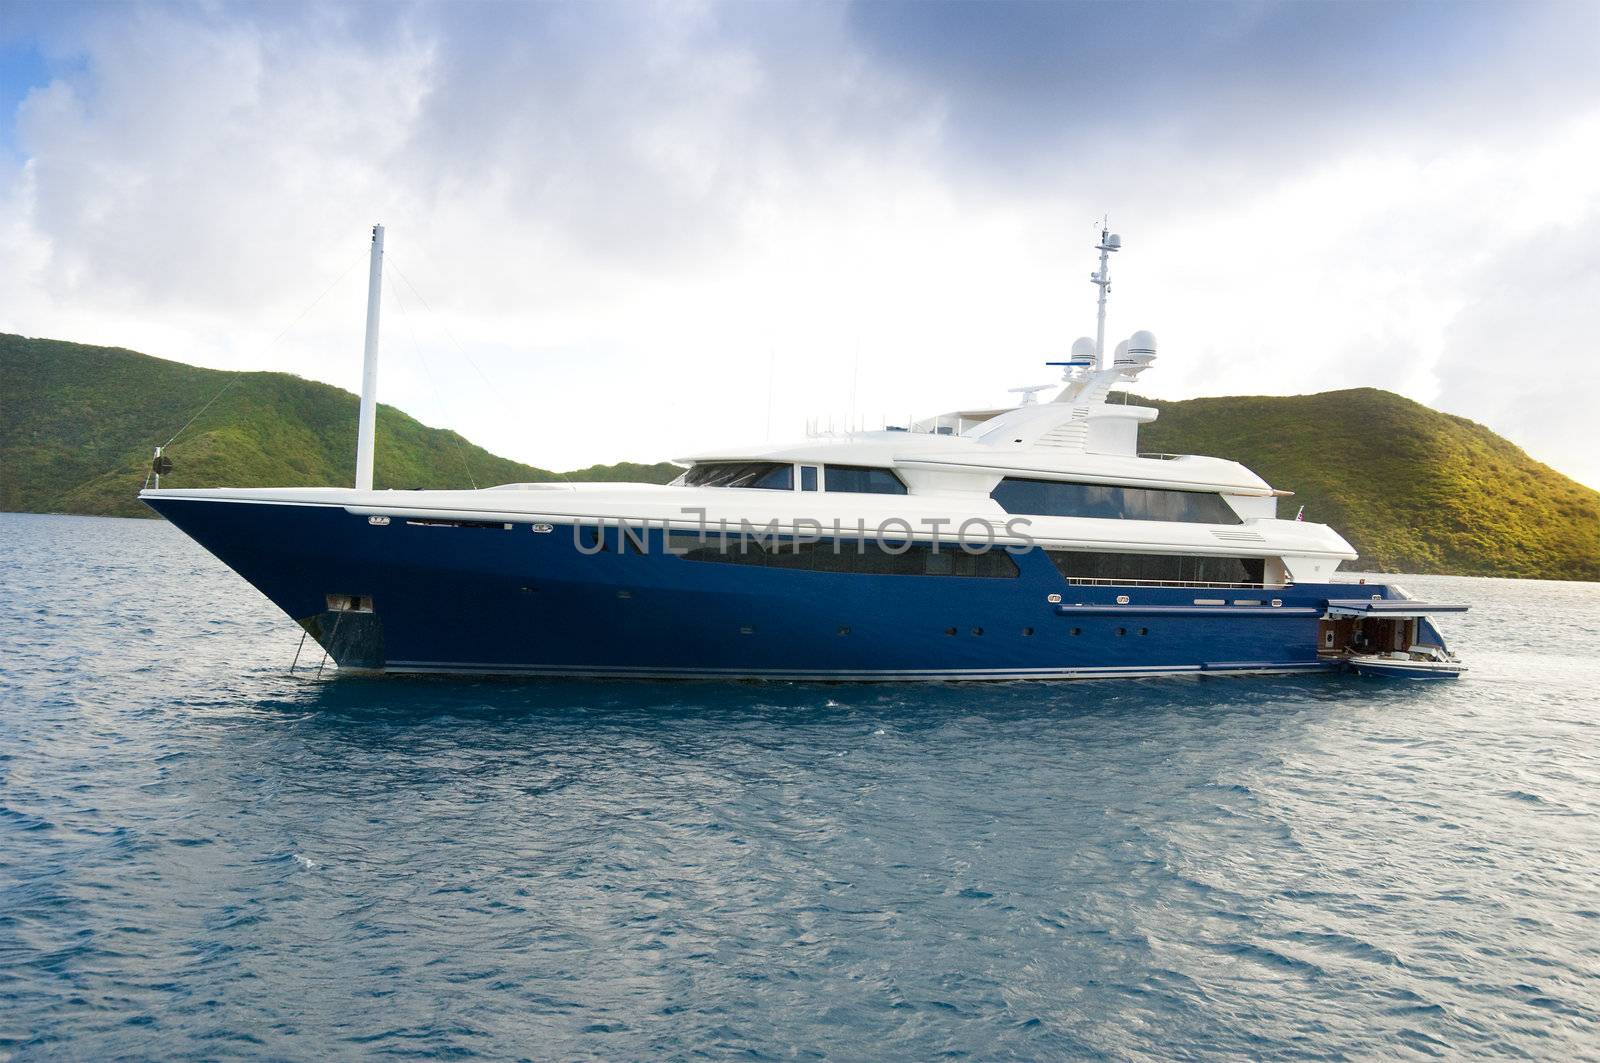 Luxury yacht at anchor in the caribbean BVI islands